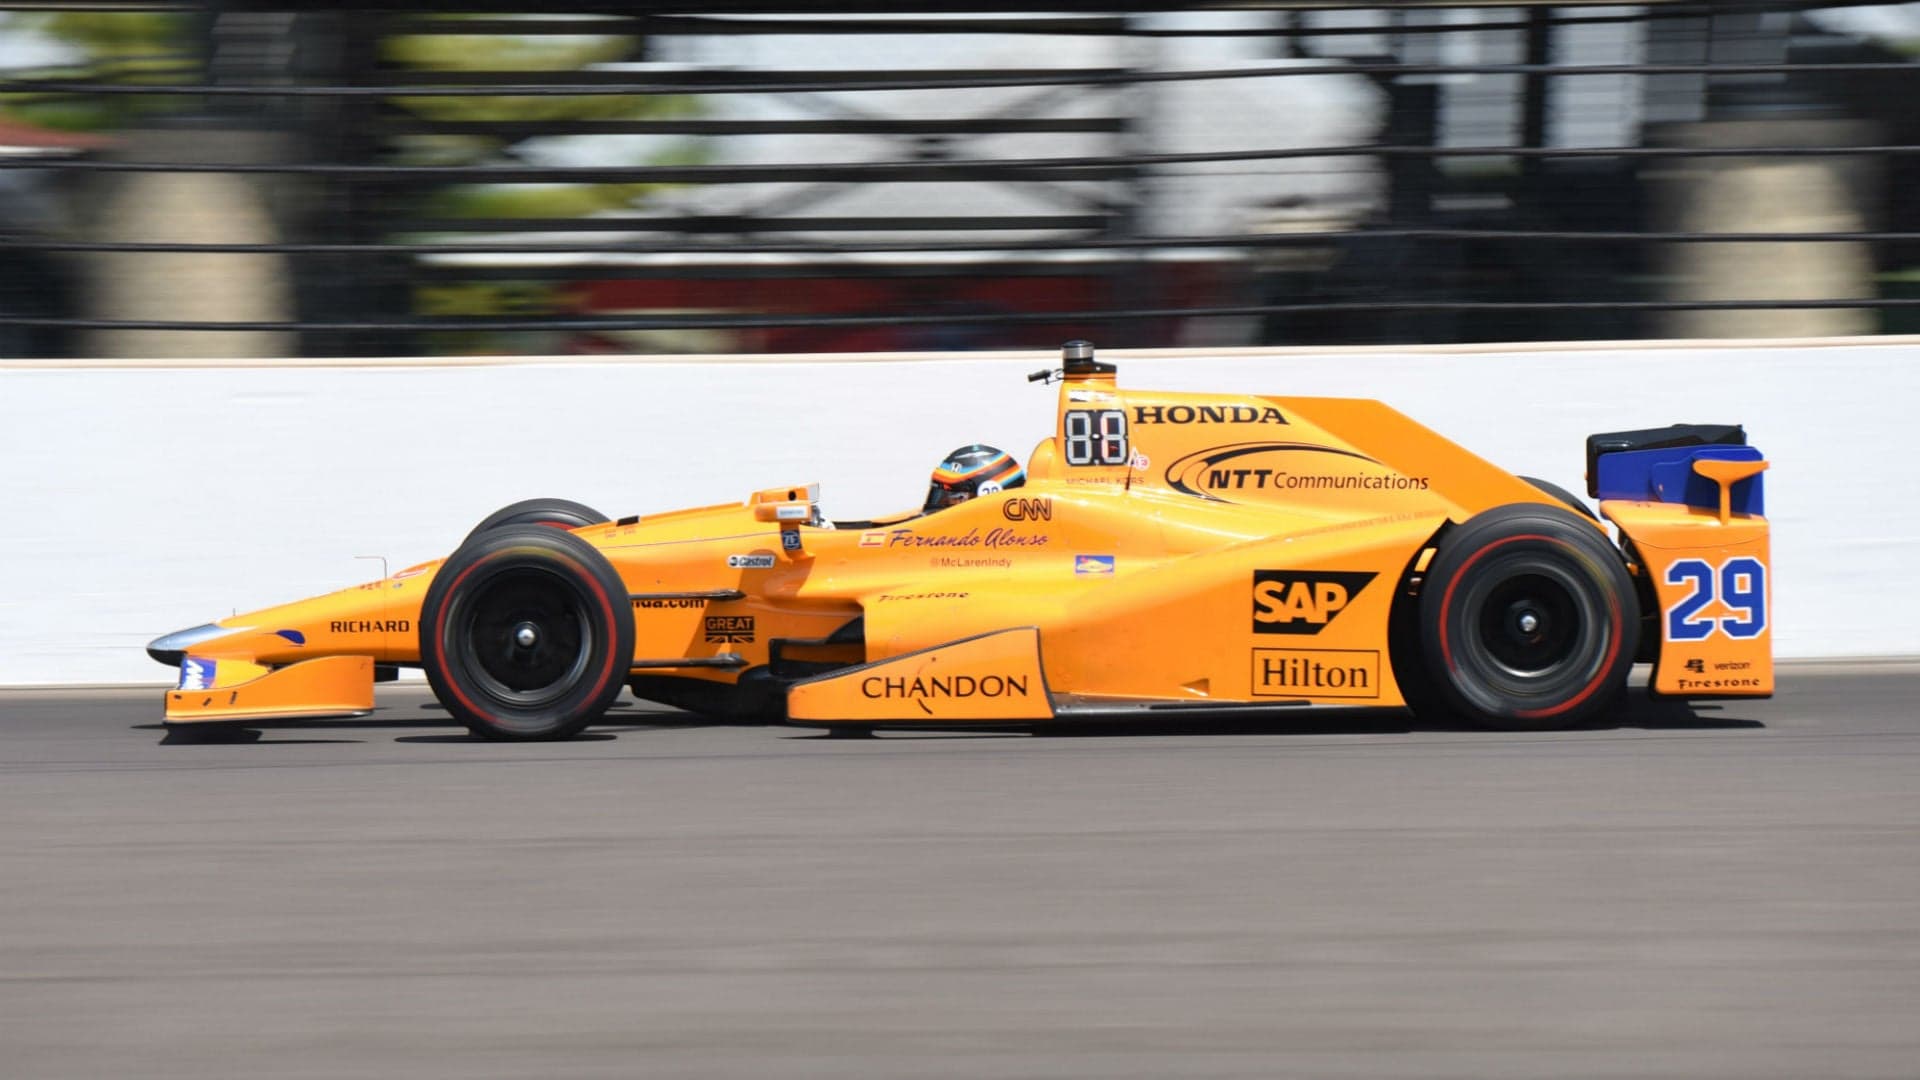 Zak Brown: McLaren Probably Won’t Be Racing at the Indy 500 in 2018